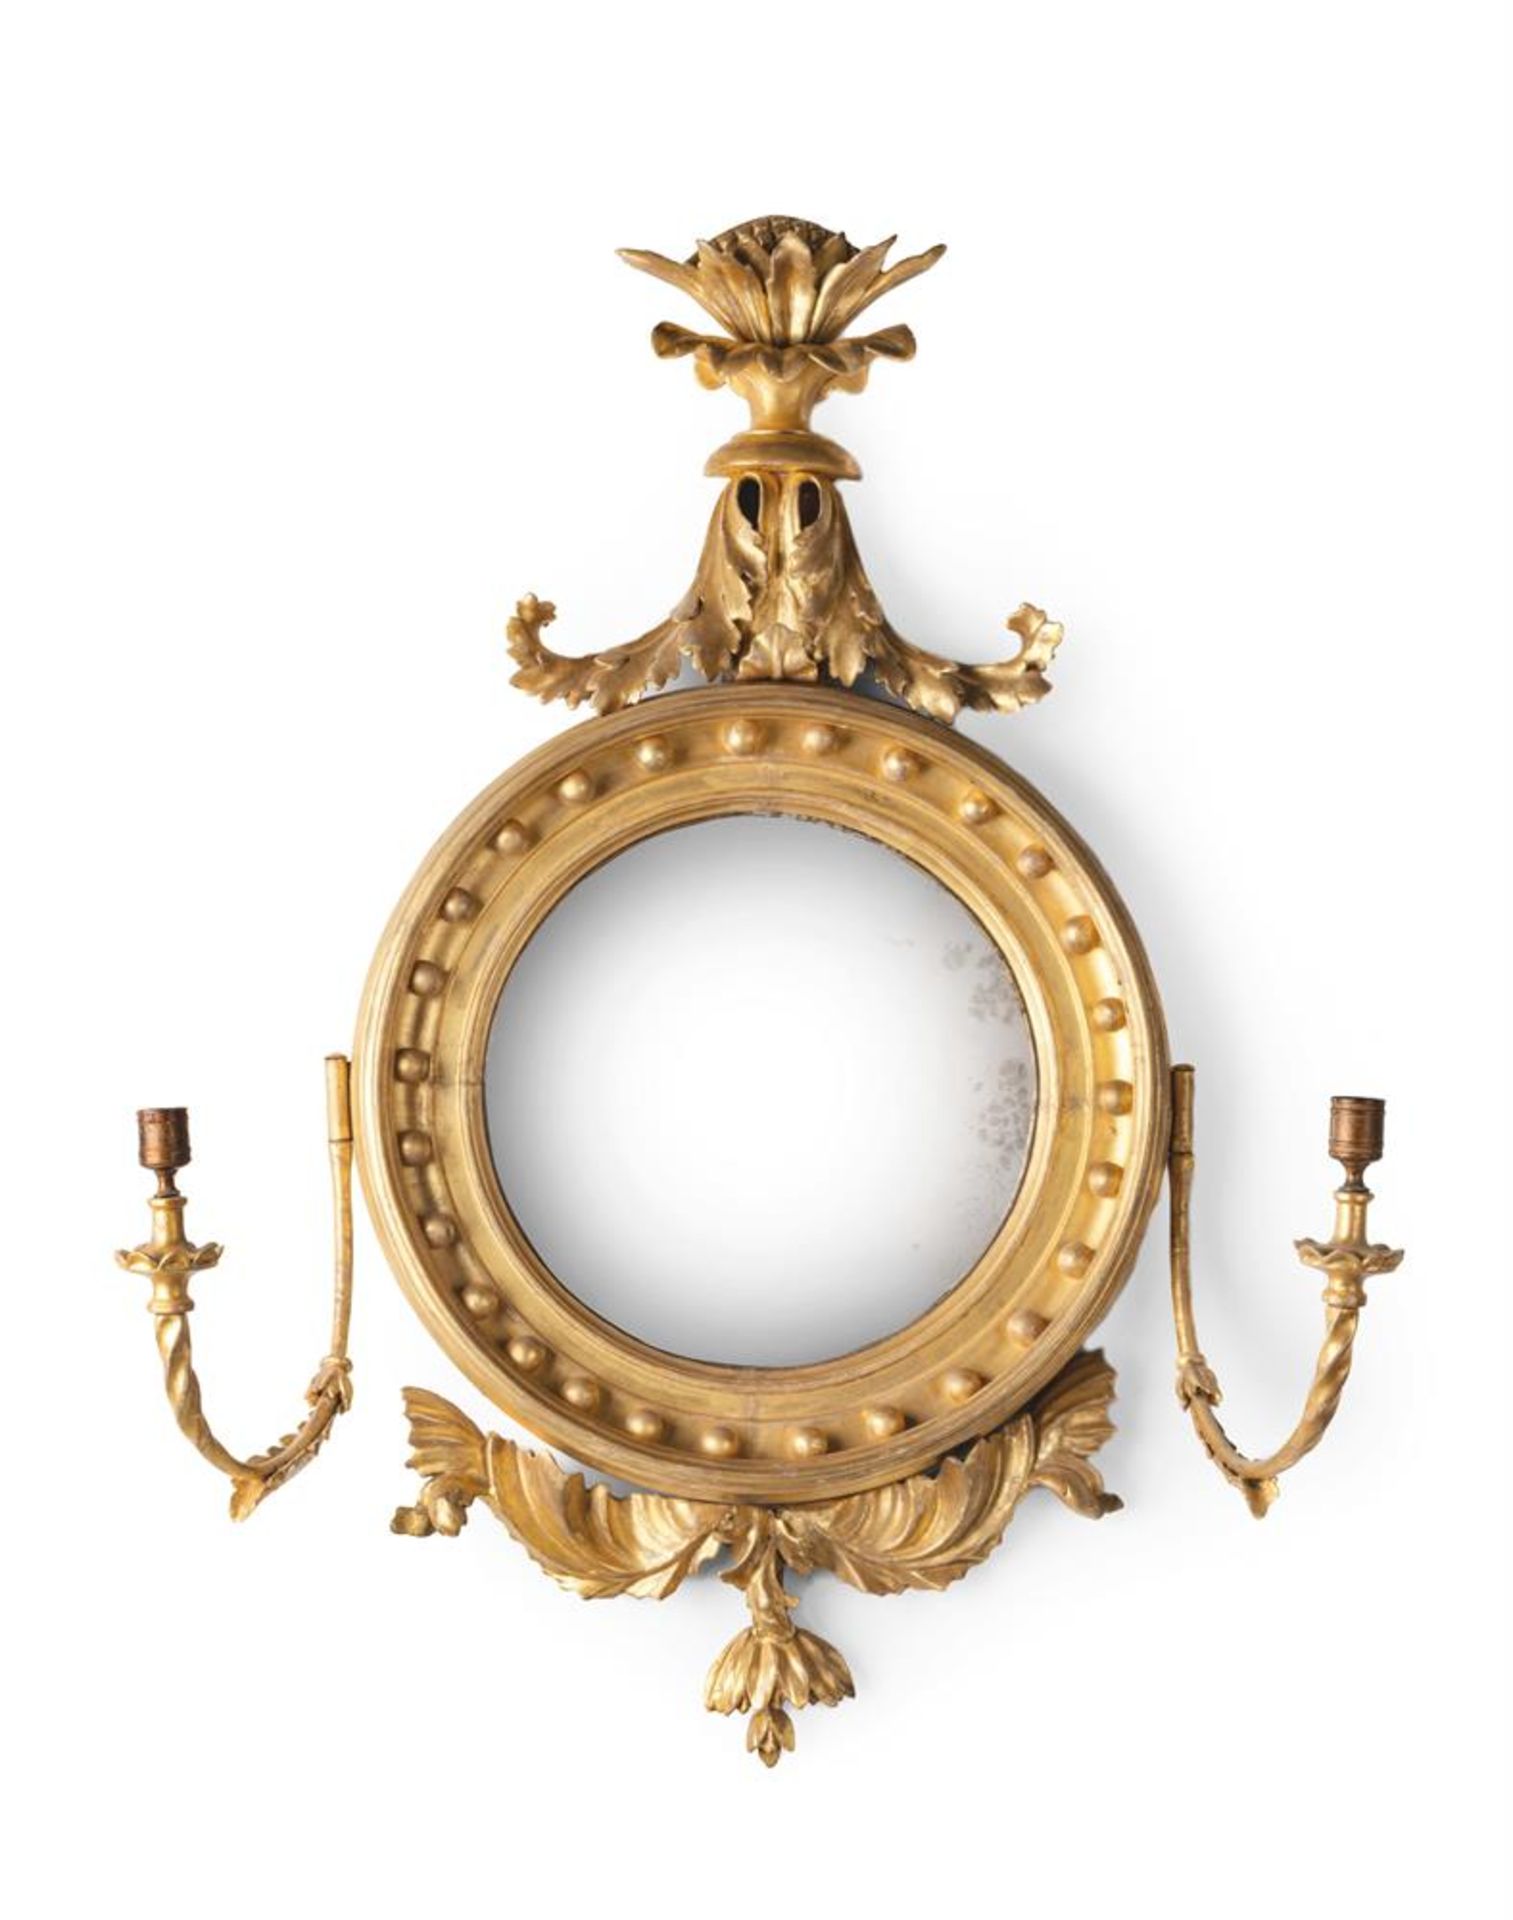 A REGENCY CARVED GILTWOOD CONVEX MIRROR, CIRCA 1820 - Image 2 of 6